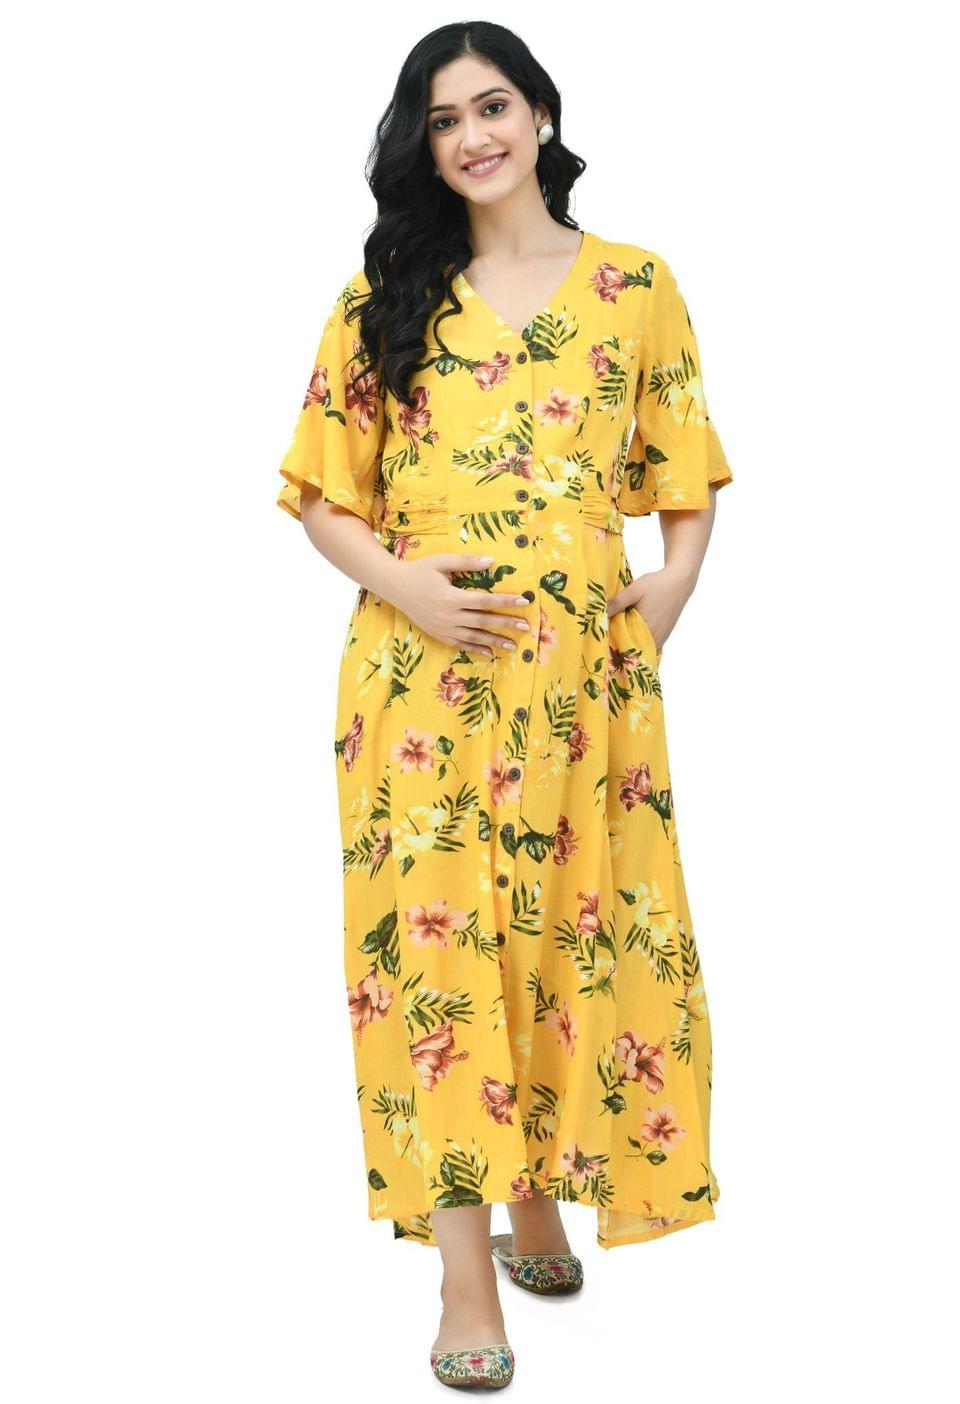 Mometernity Yellow Floral Tropical Print Maternity and Nursing Dress